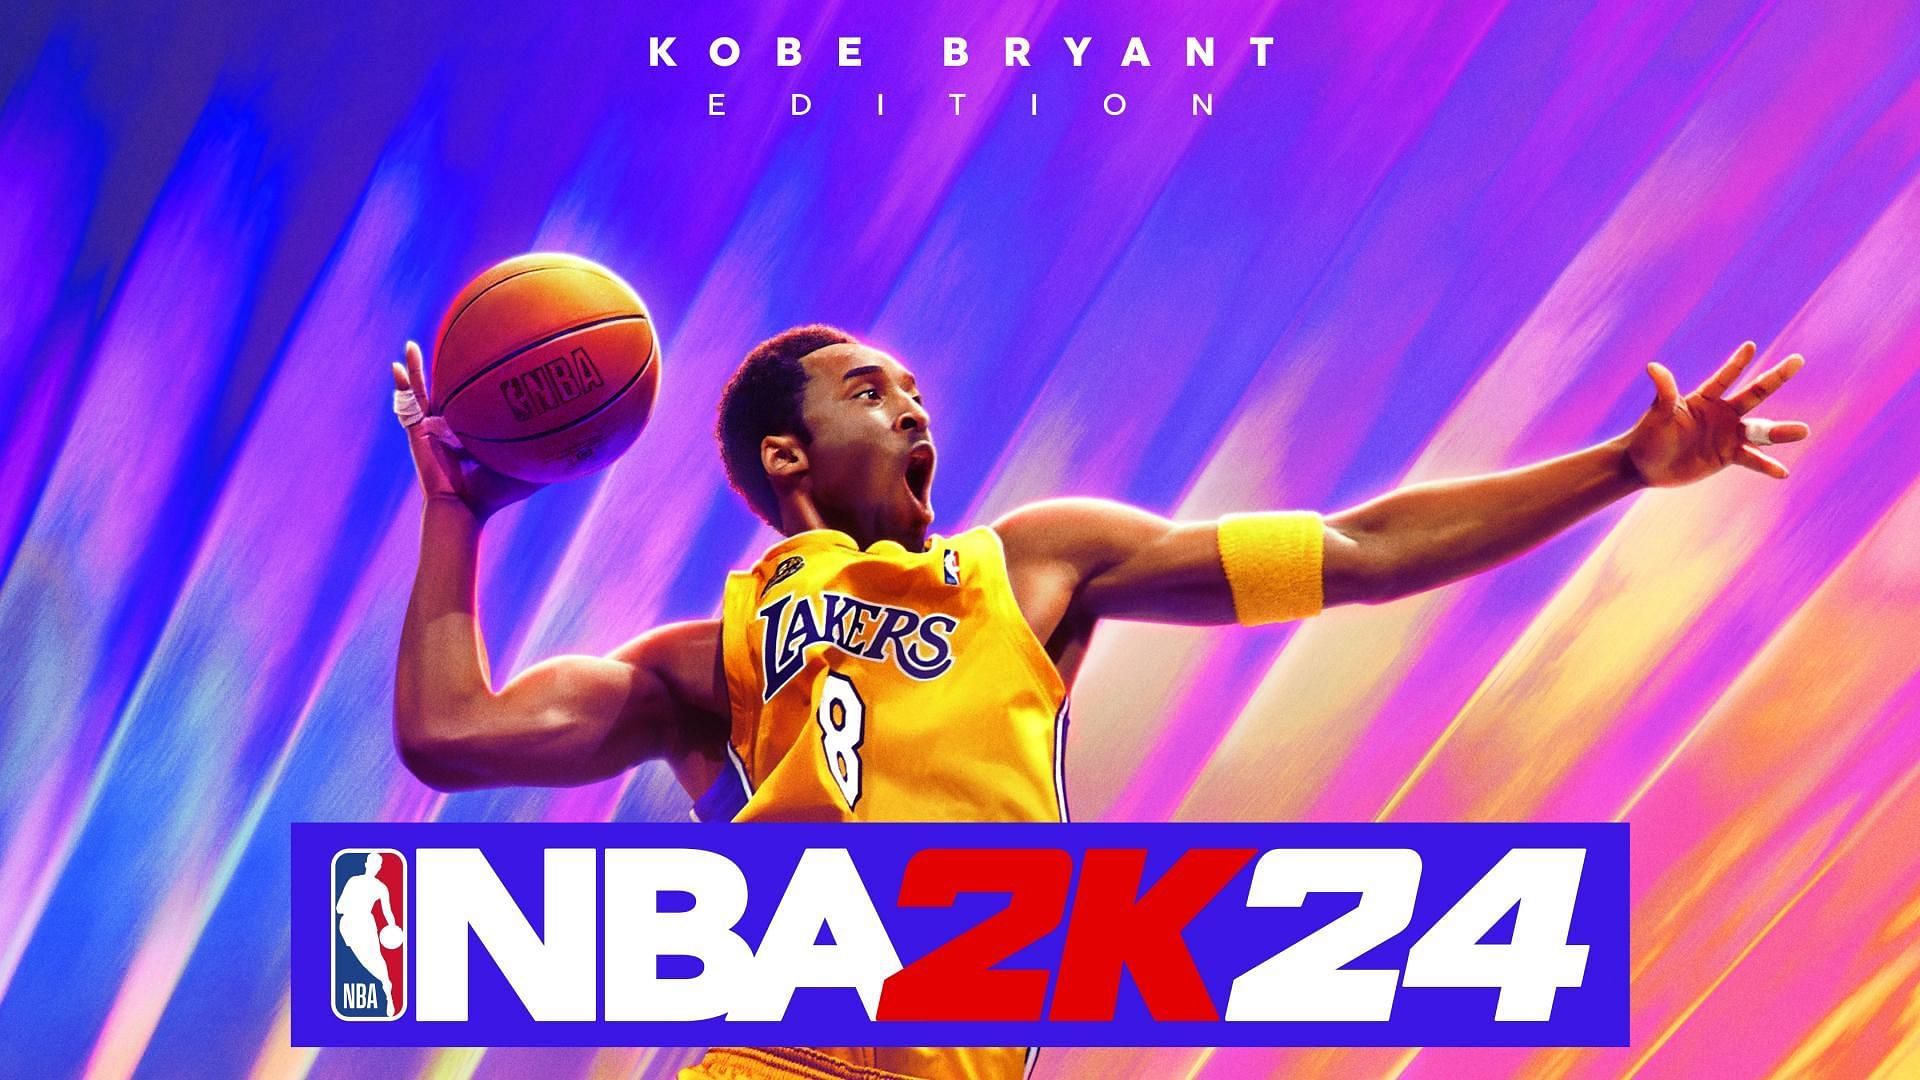 NBA 2k24 will have Kobe Bryant as the cover athlete for this year